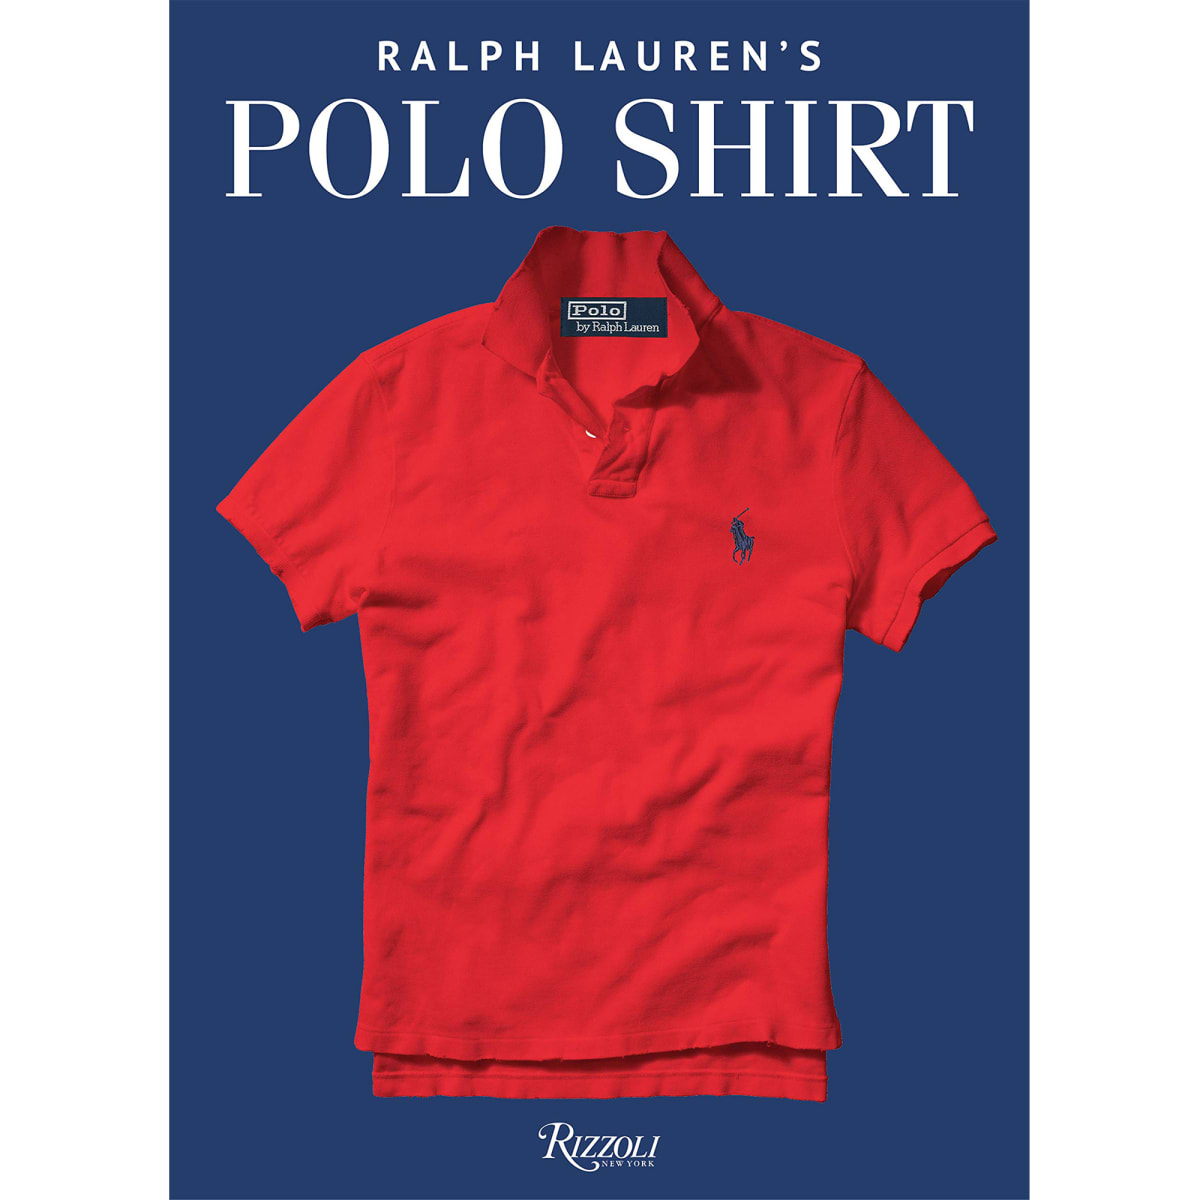 Rizzoli and Ralph Lauren's upcoming book takes a look back at the history  of the iconic Polo Shirt - Acquire